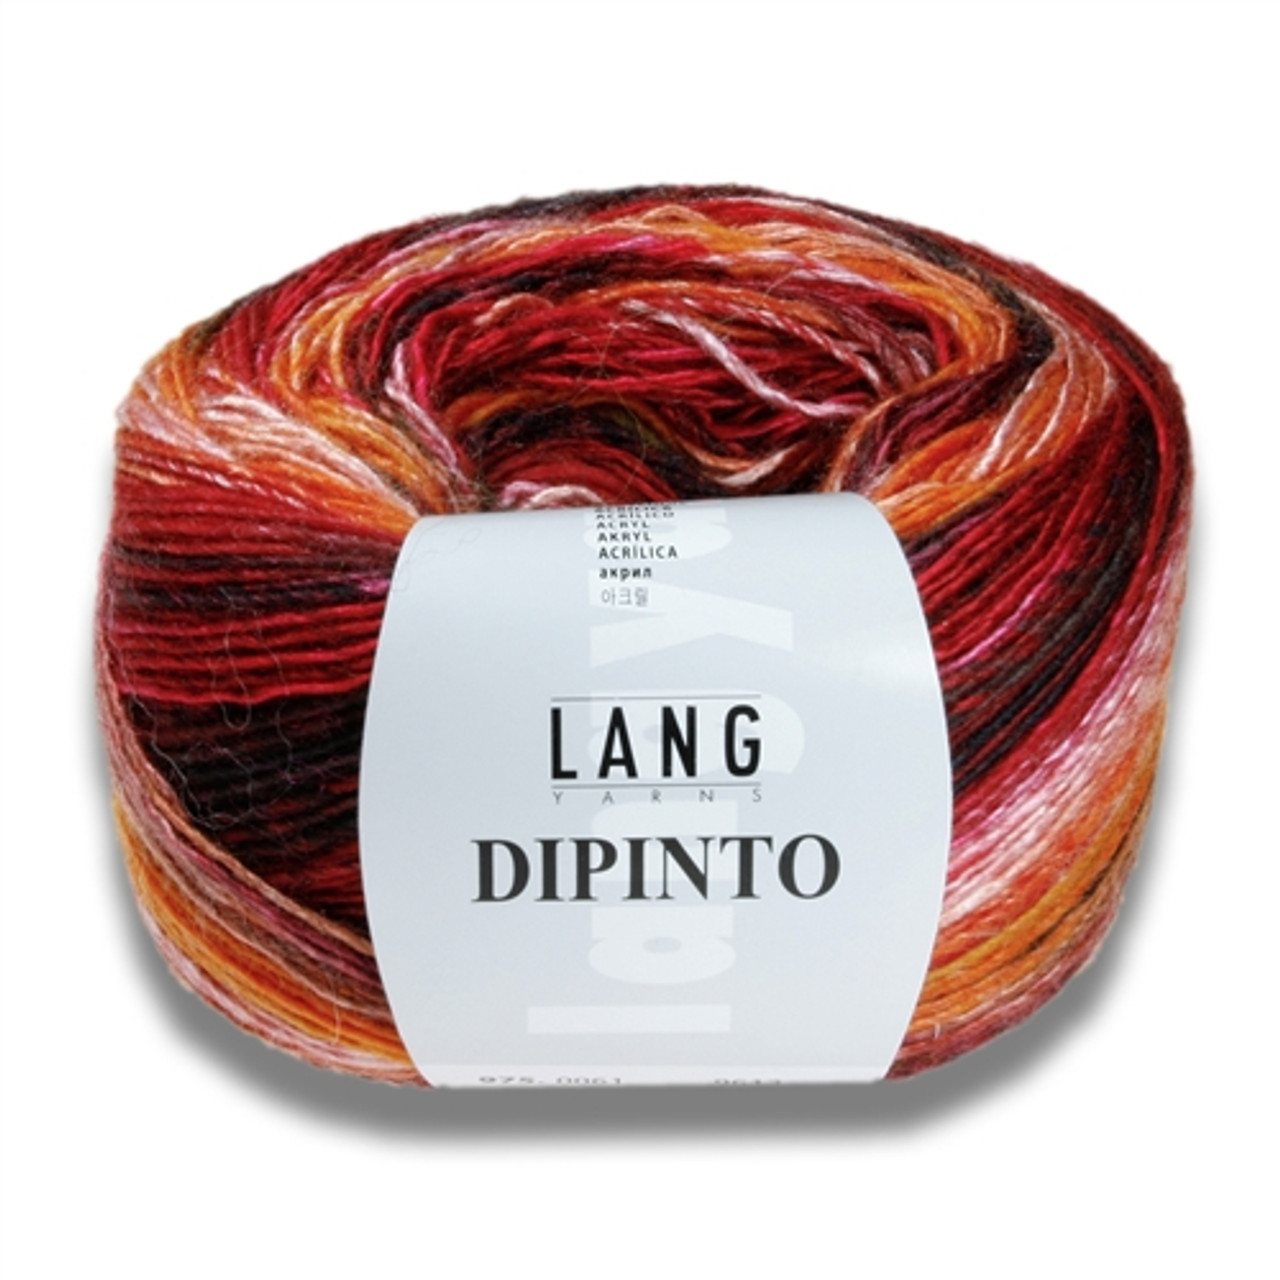 DiPinto Multi-Color Machine-Washable Sport Yarn by Lang